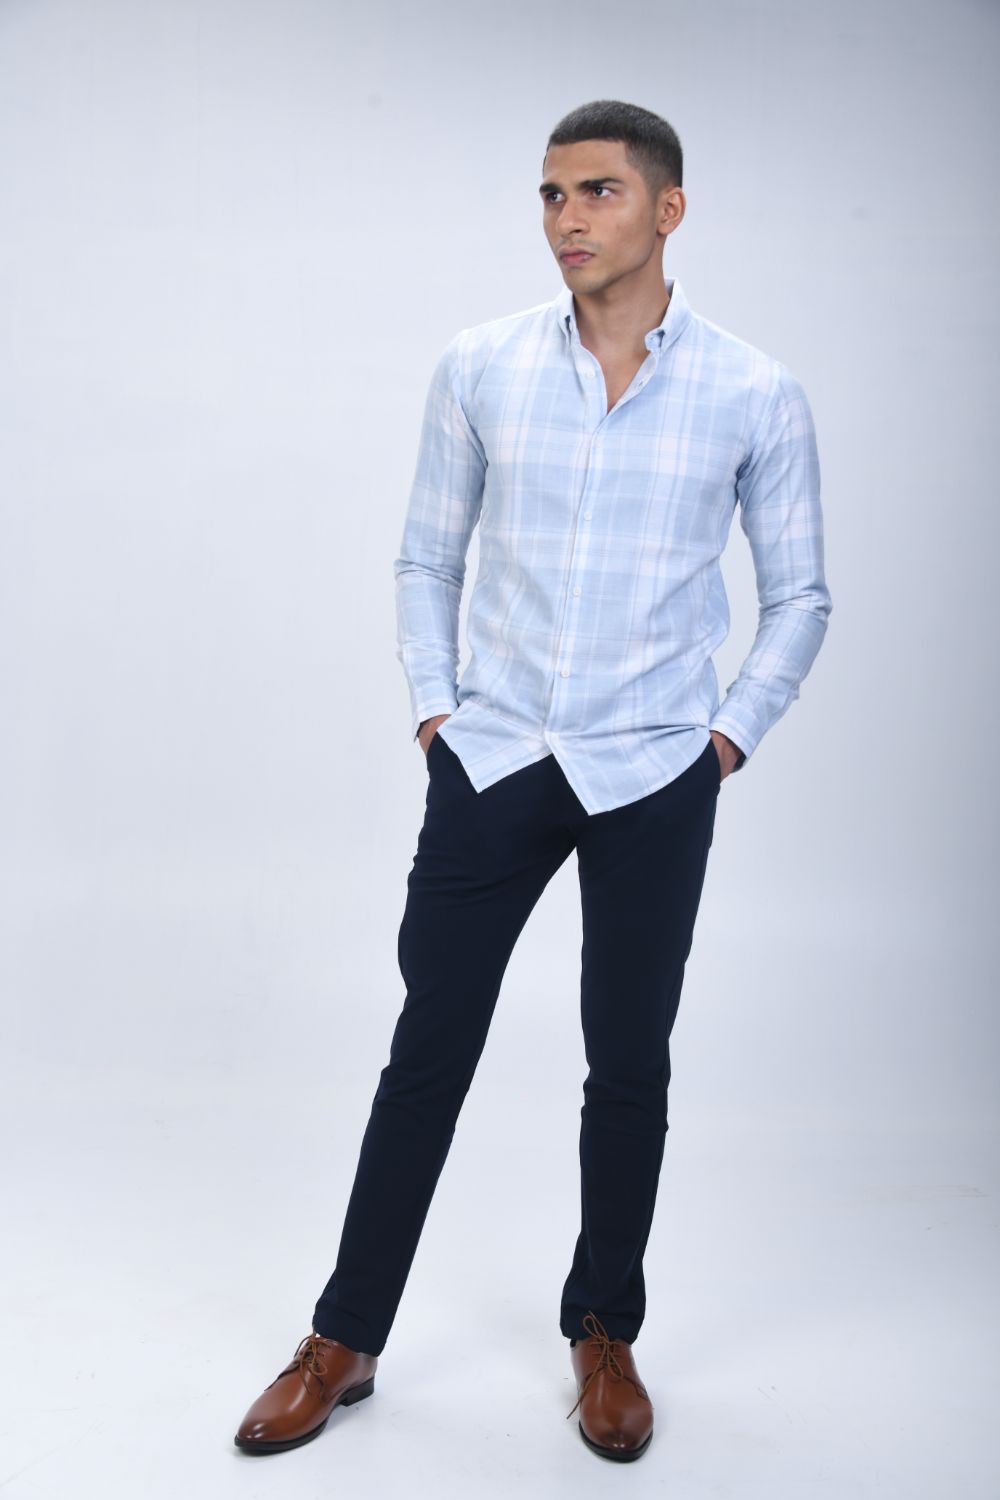 What color of pants should I wear with a dark blue shirt? - Quora